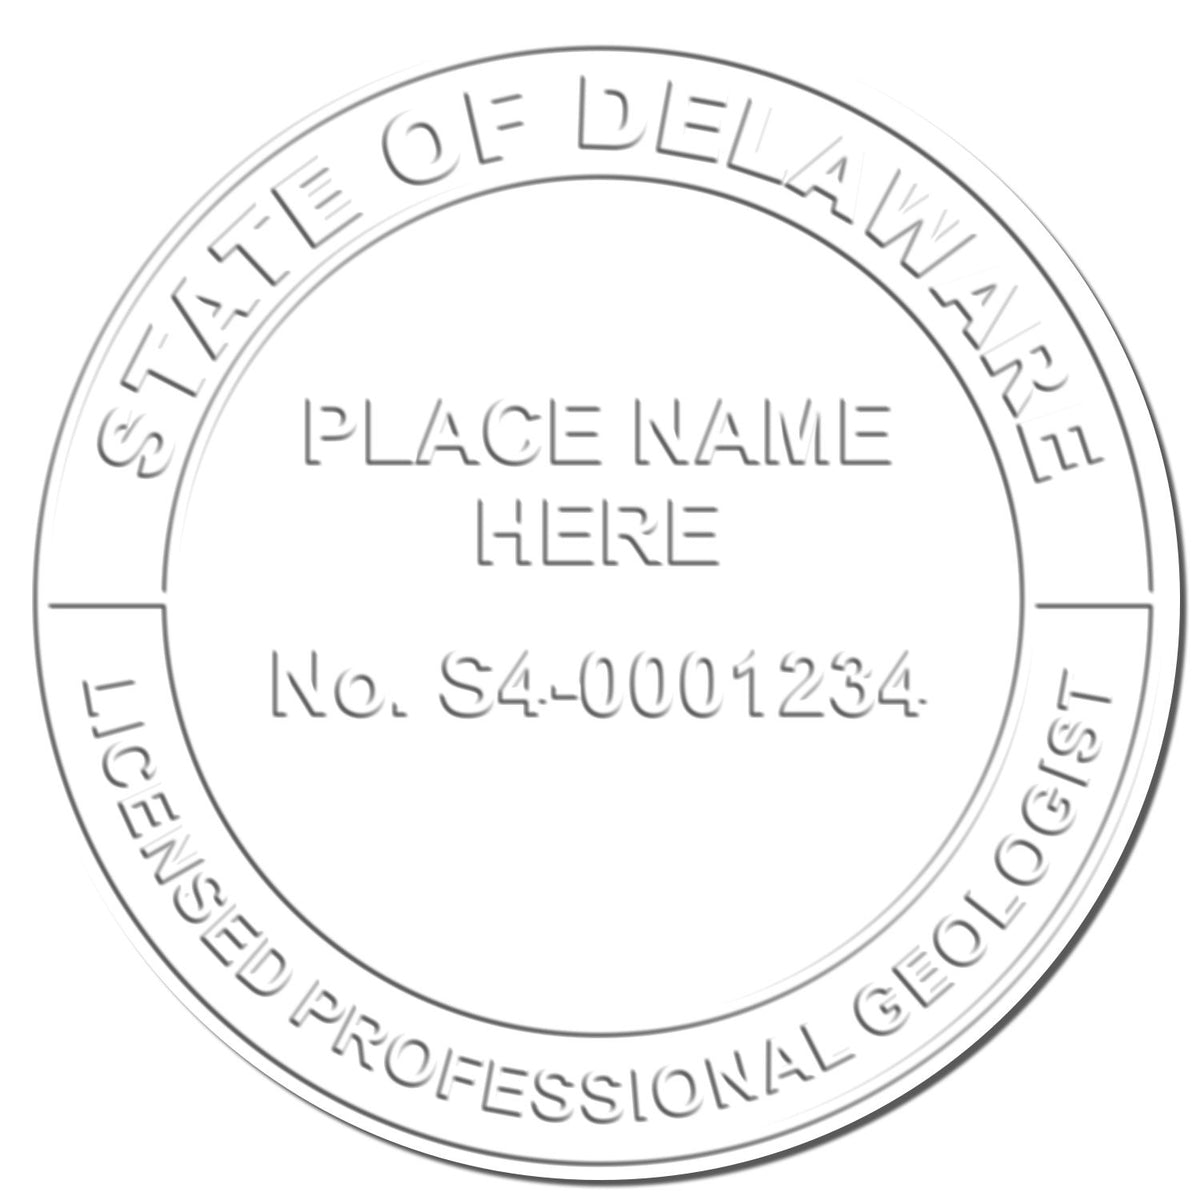 A photograph of the State of Delaware Extended Long Reach Geologist Seal stamp impression reveals a vivid, professional image of the on paper.